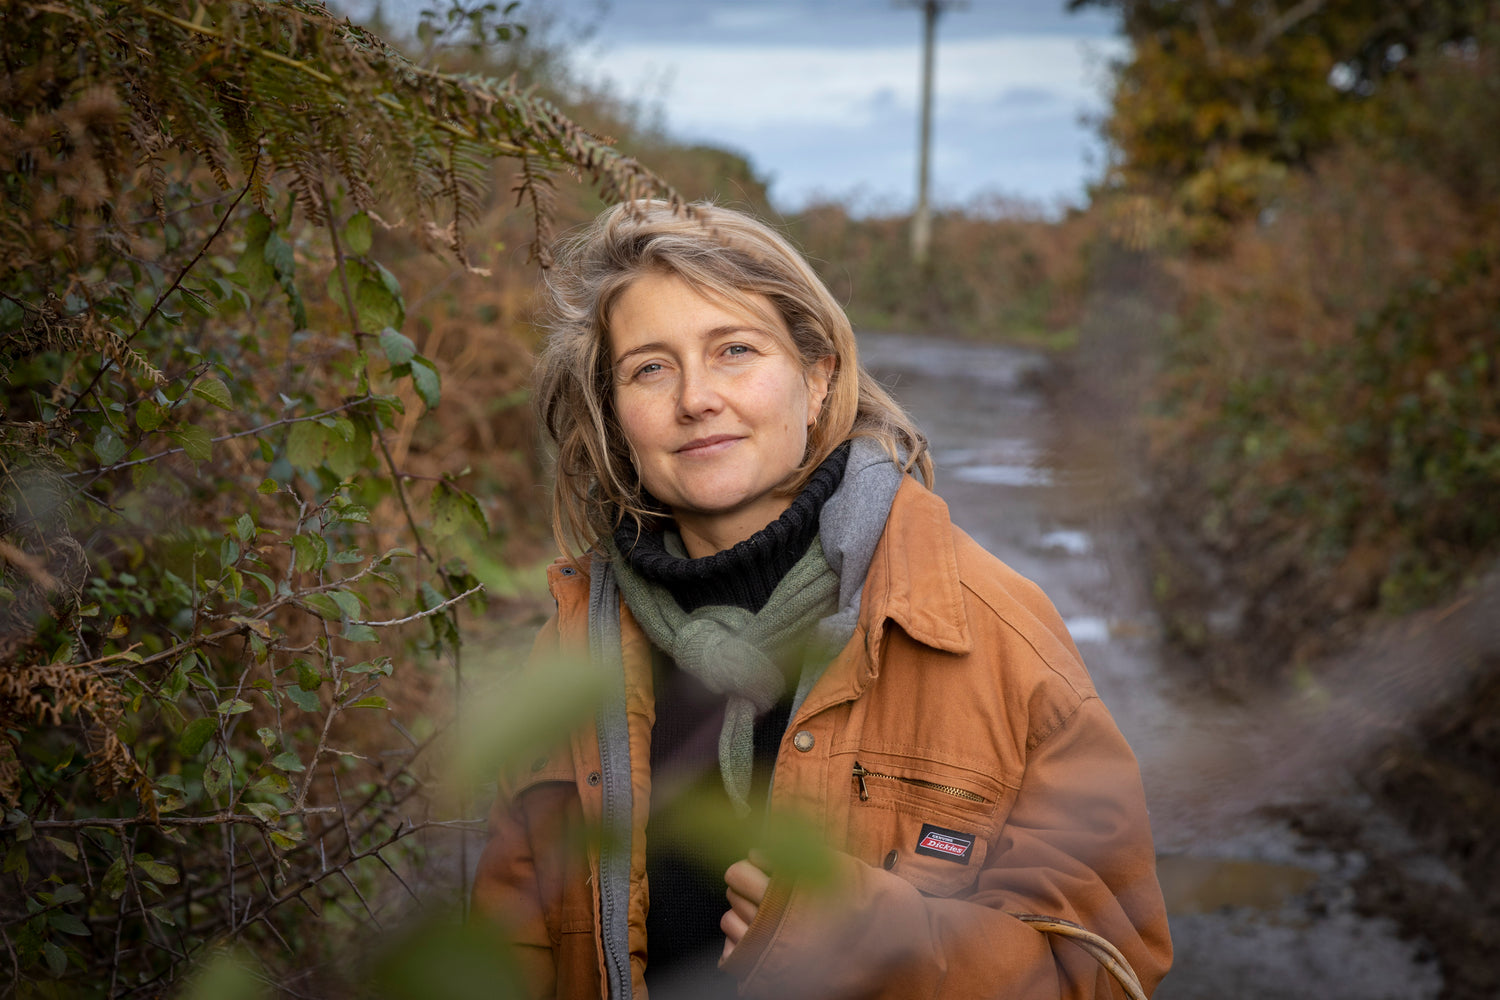 Emily Archer wearing an orange jacket and grey scarf. She is surrounded by foliage and is on a dirt road.